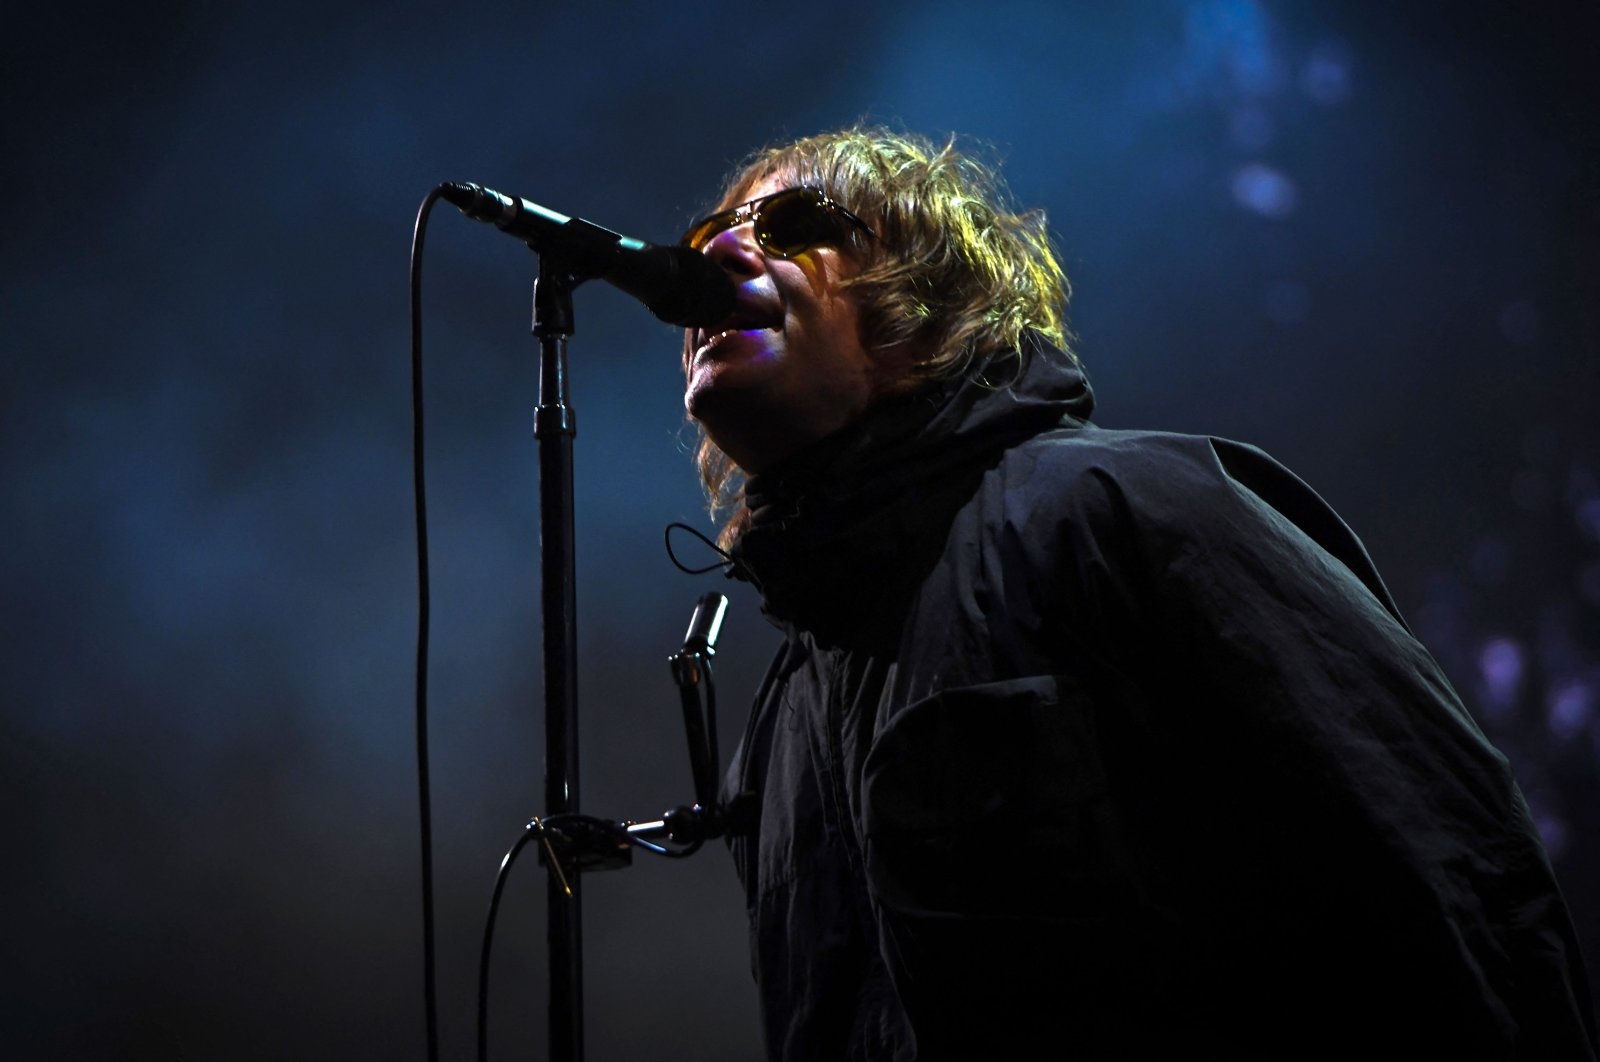 Liam Gallagher headlines the main stage during the TRNSMT Festival on Glasgow Green in the center of Glasgow, Scotland on Sept. 11, 2021. (AFP Photo)